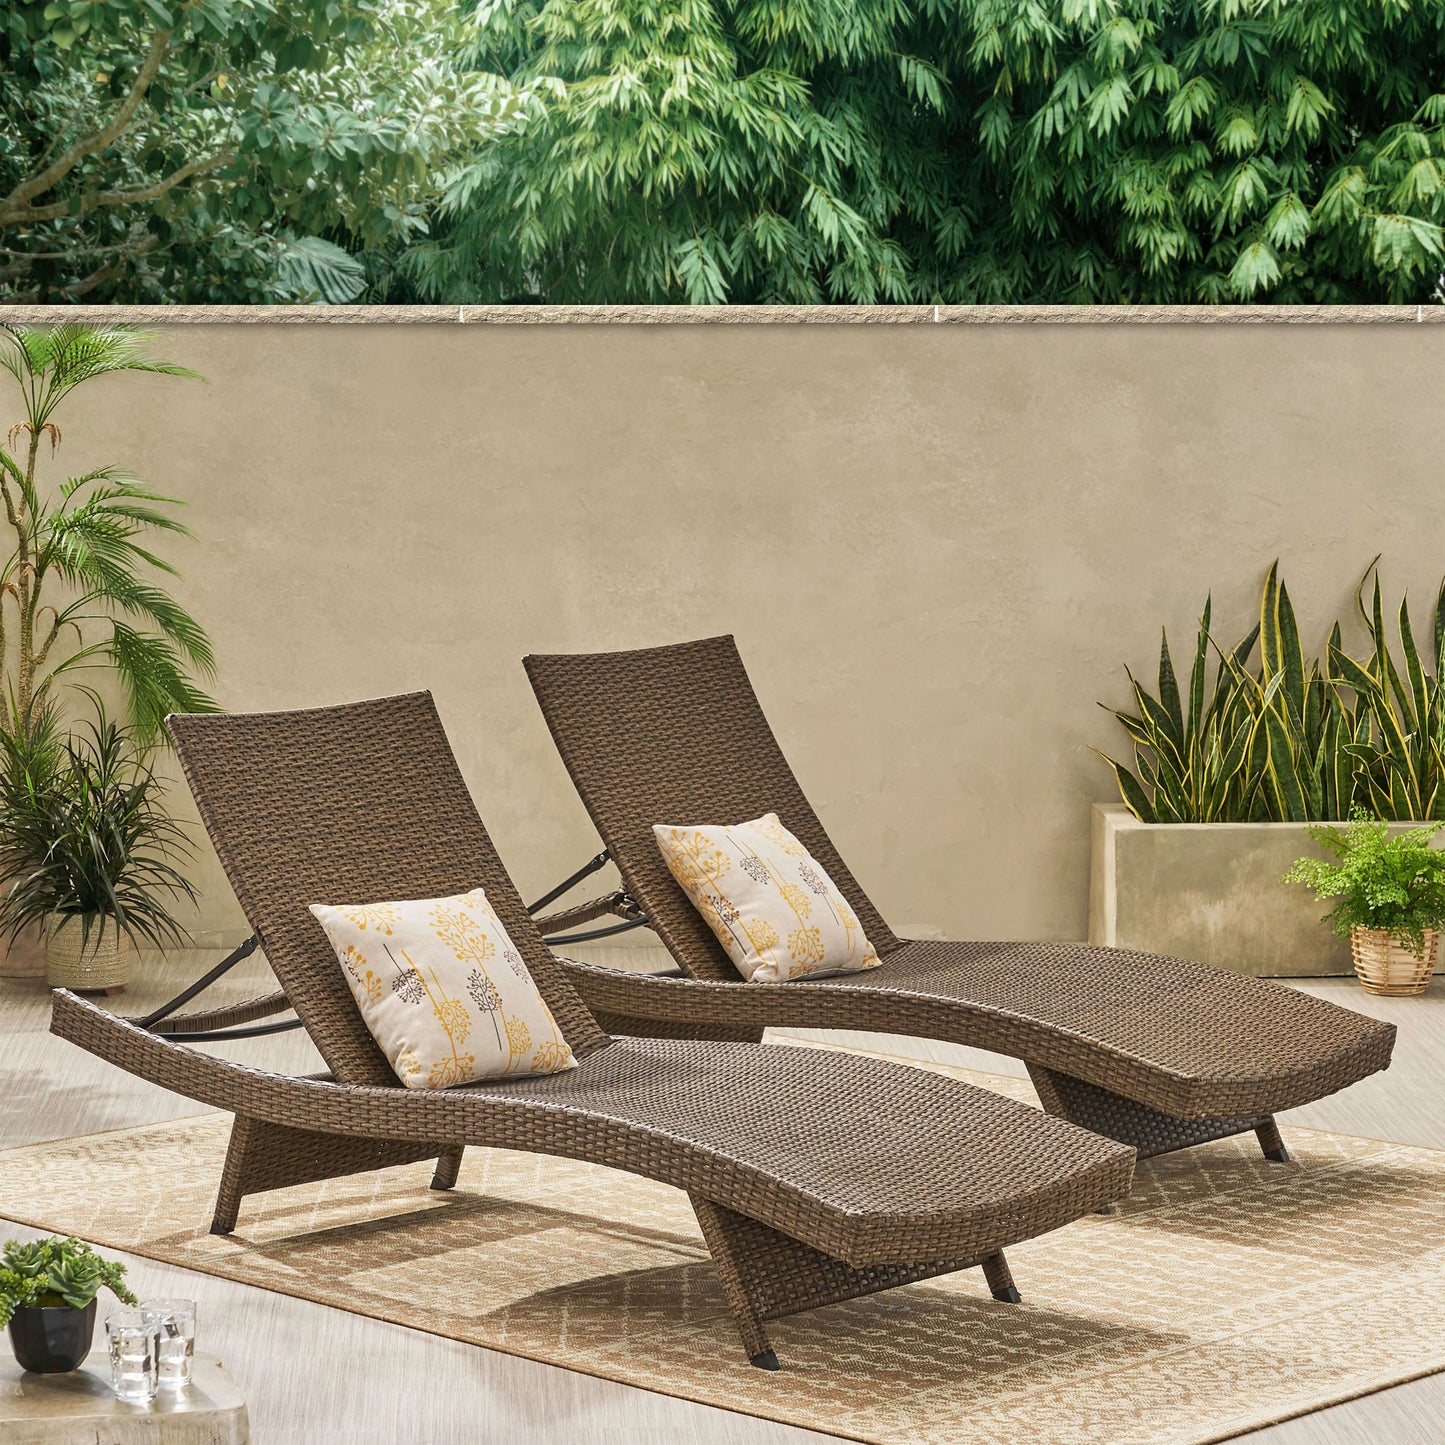 Lakeport Outdoor Mixed Mocha Wicker Armless Chaise Lounge (Set of 2)